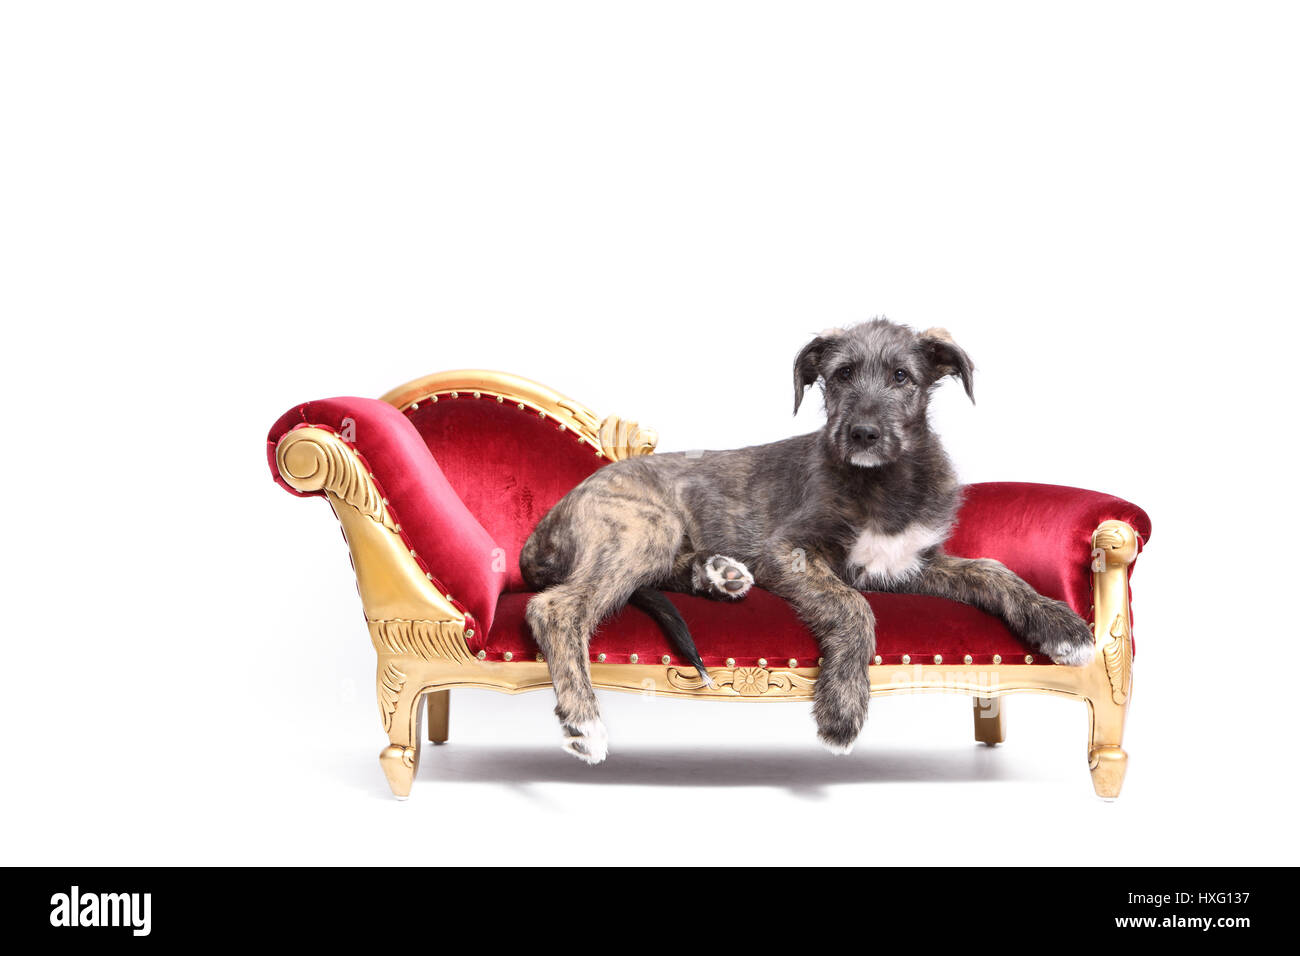 Irish Wolfhound. Puppy (9 weeks old) lying on a chaise longue. Studio picture against a white background. Germany Stock Photo